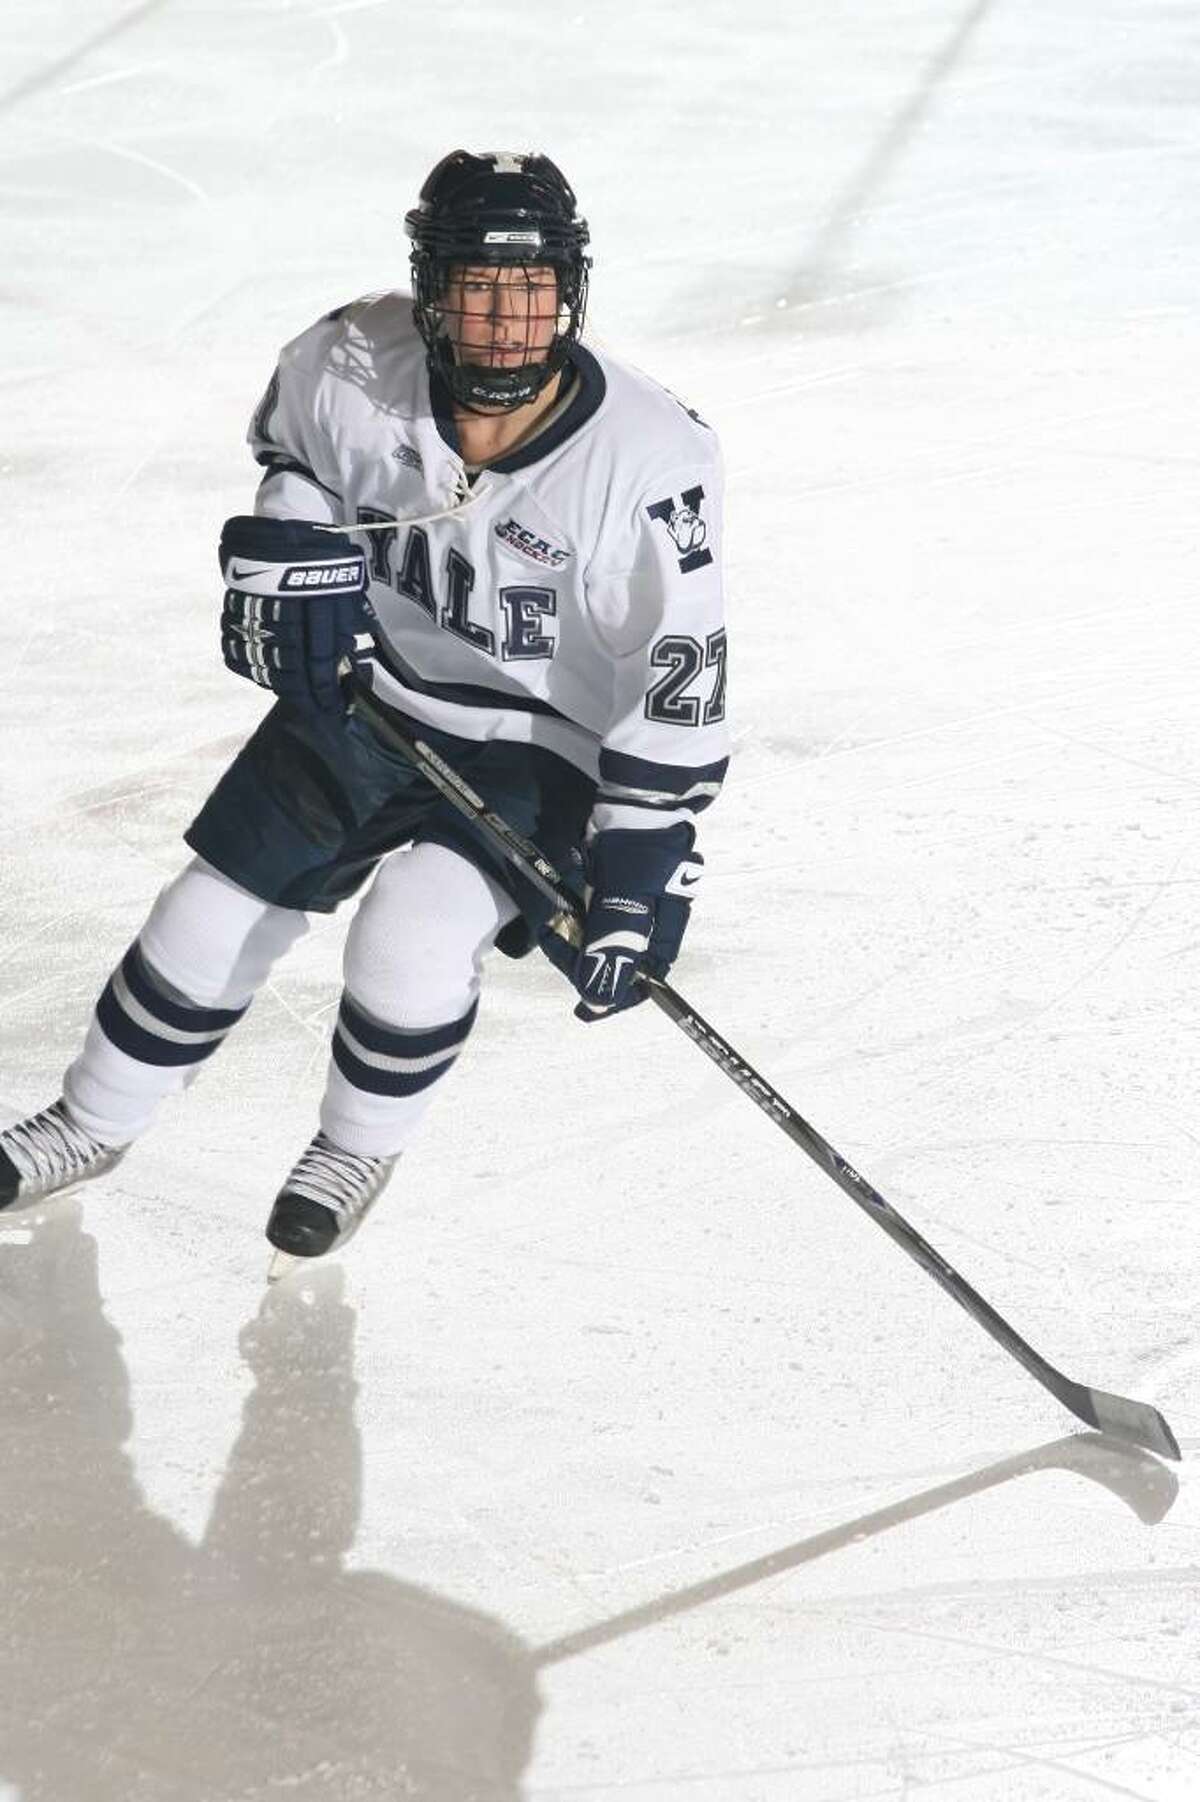 Greenwich Academy graduate and Yale forward, Bray Ketchum on the ice with the Yale University team.